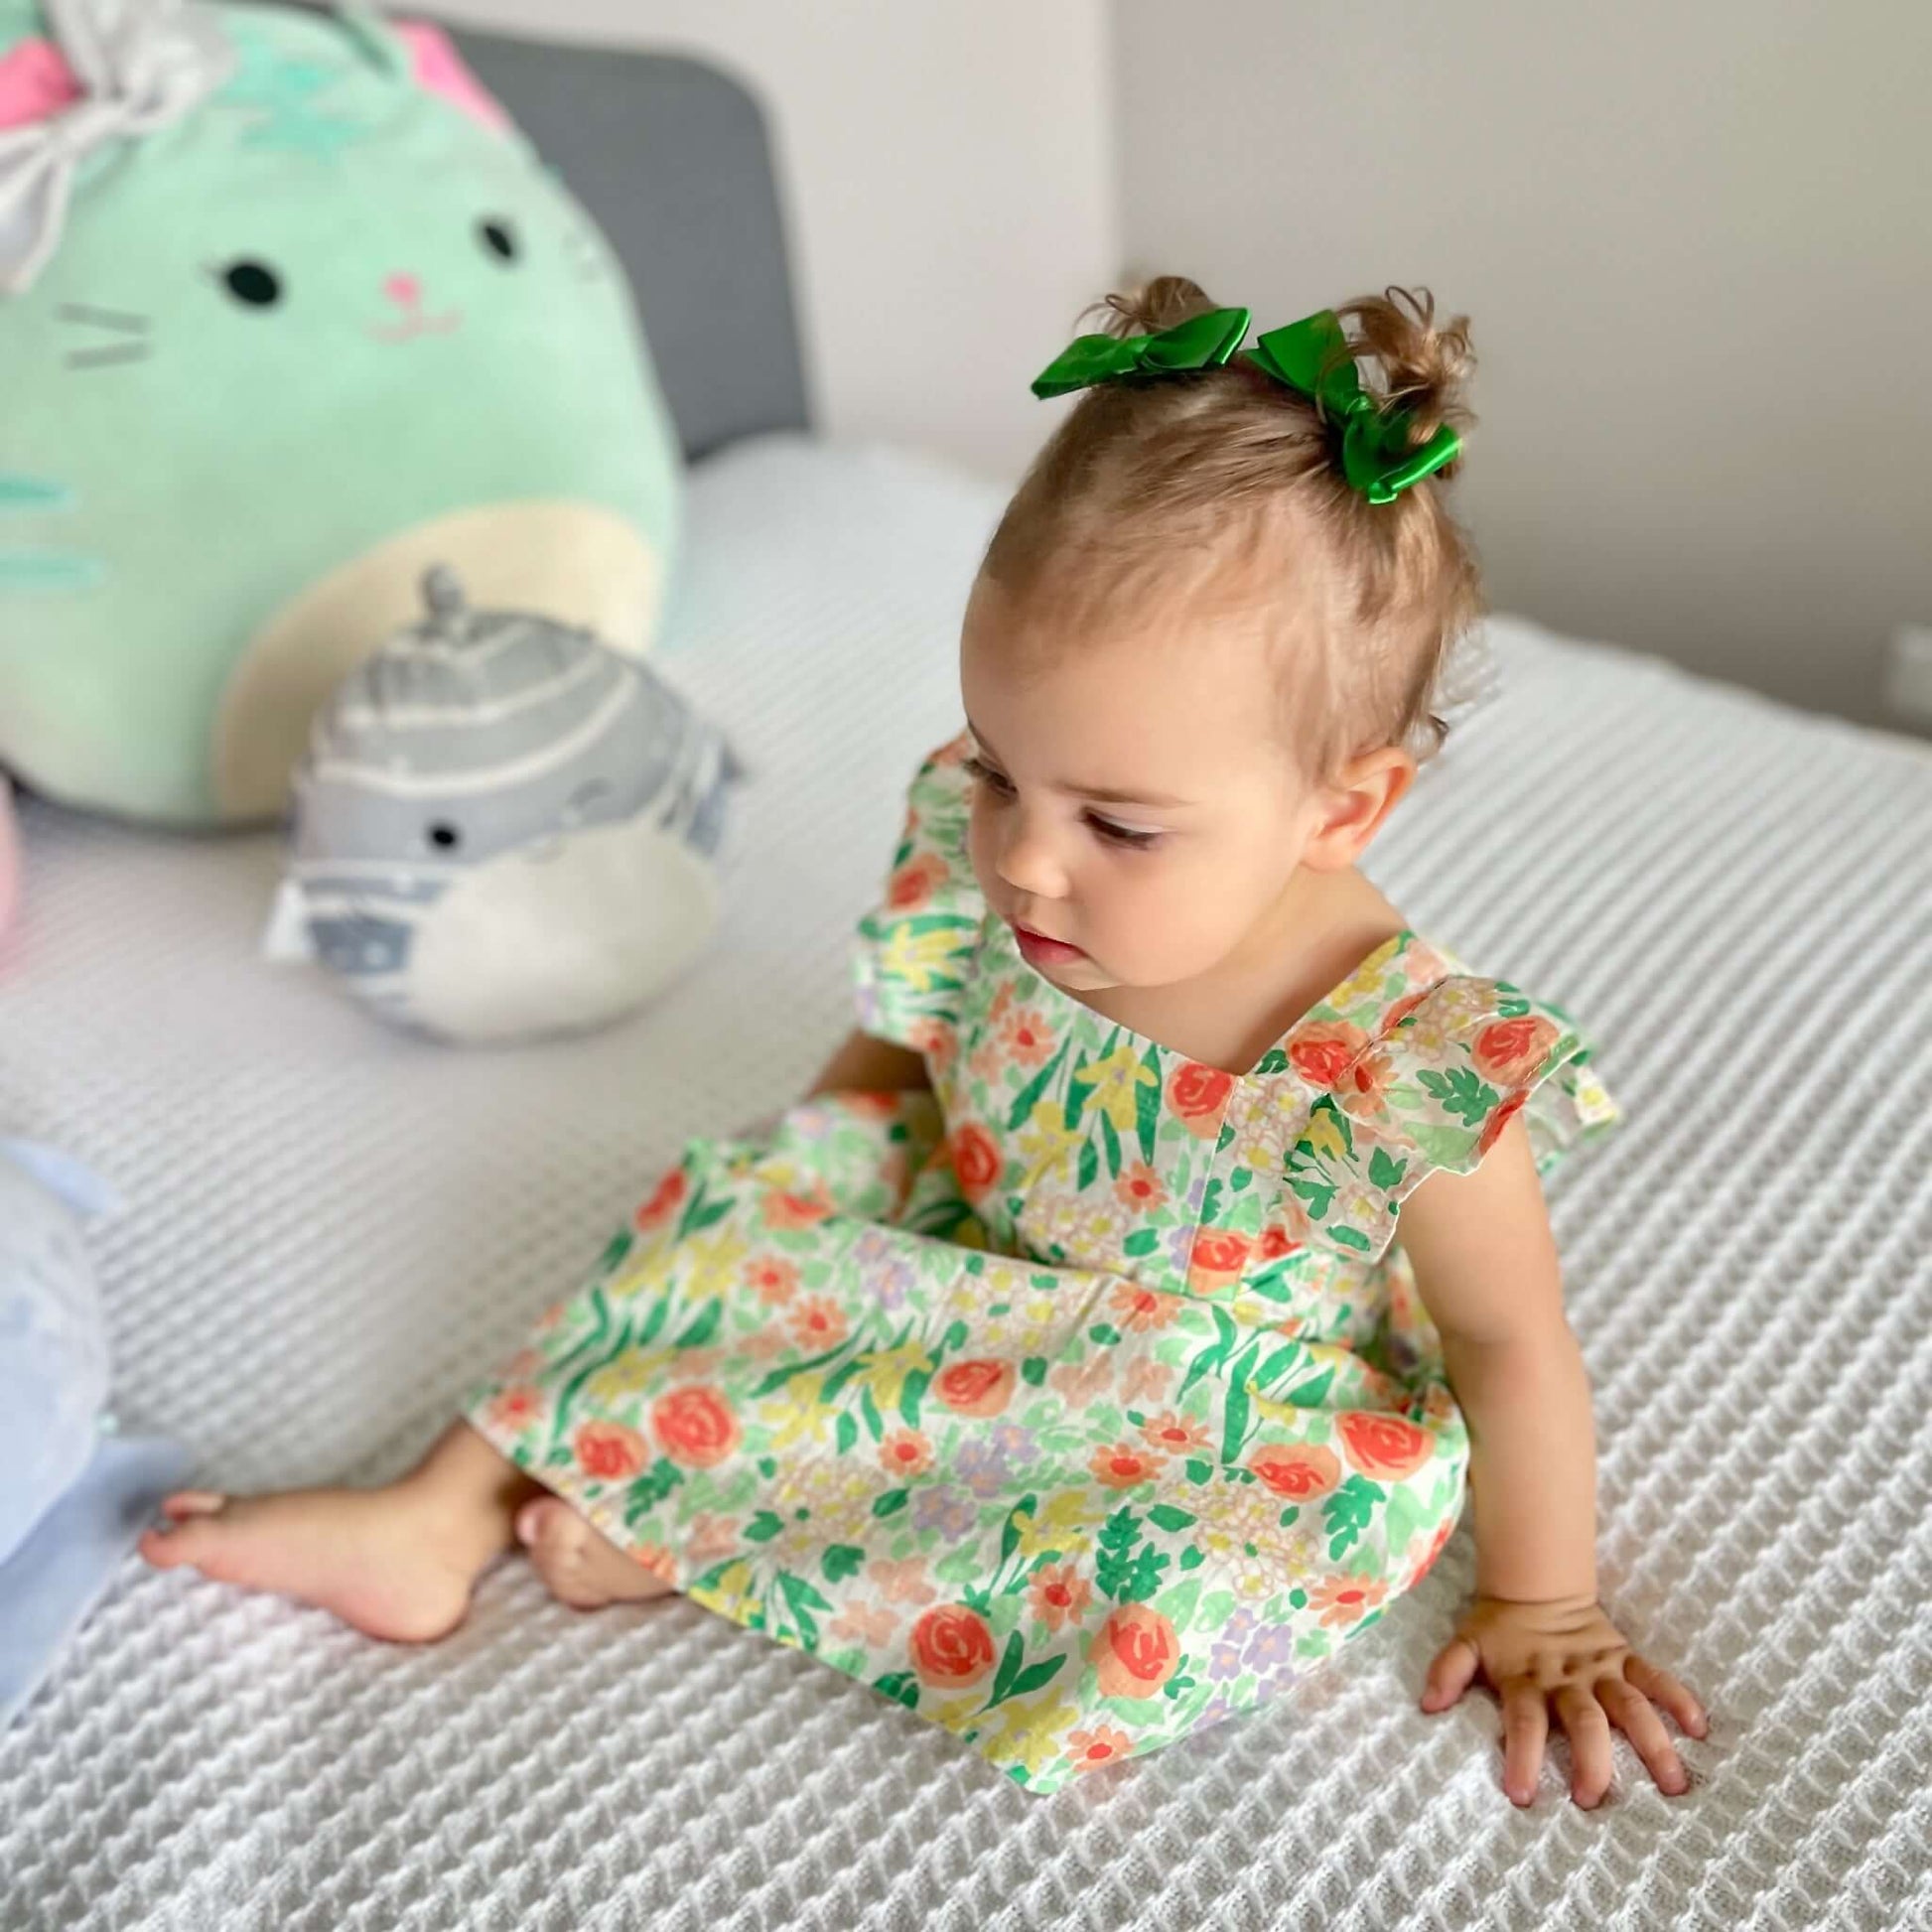 Baby wearing a floral dress and green hair bows sitting on a bed surrounded by plush toys